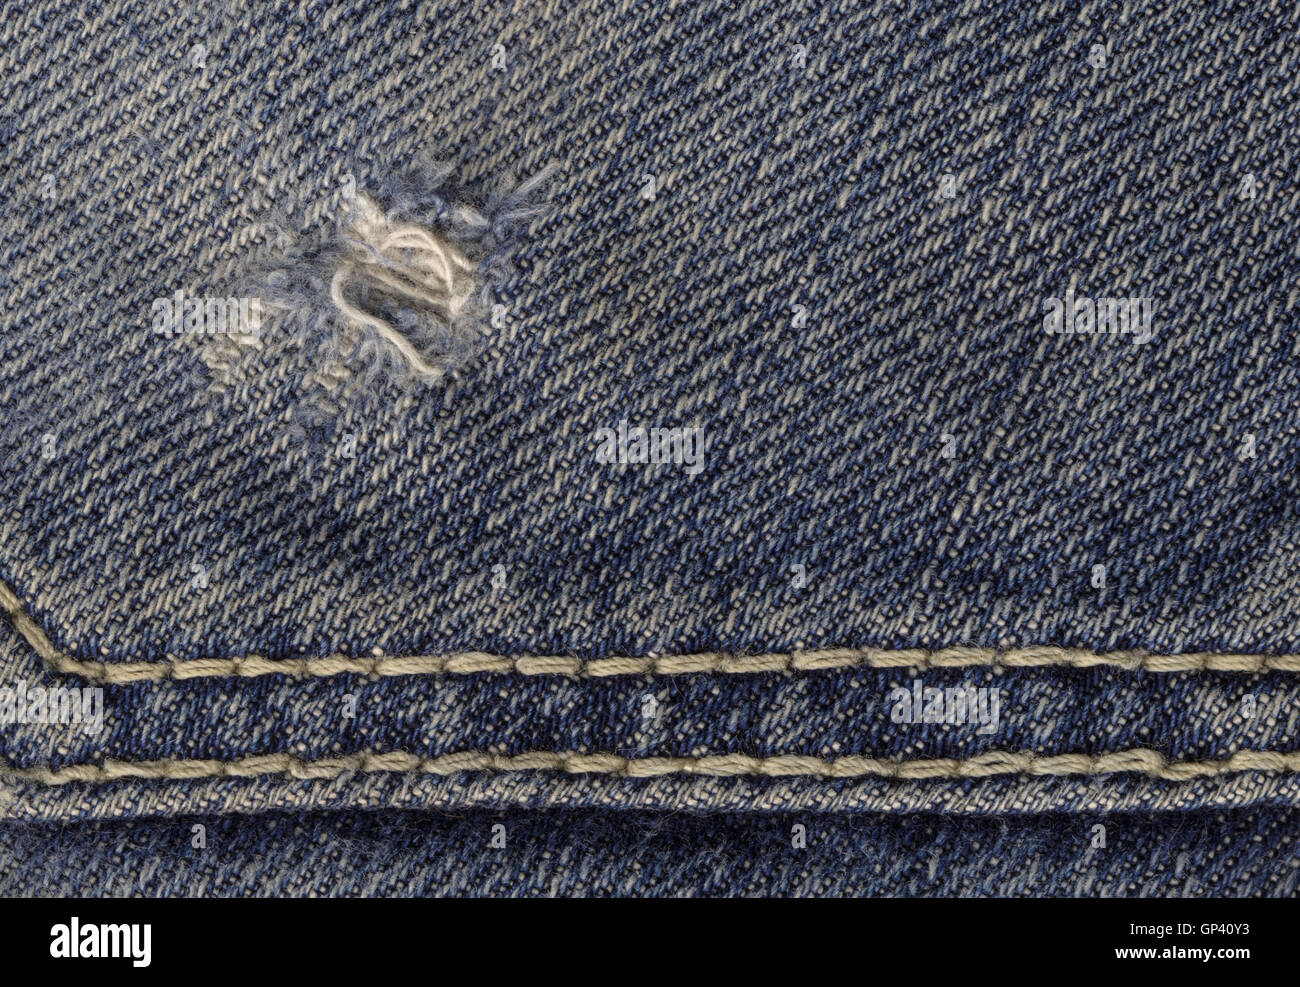 Macro View of Blue Jeans Fabric Stock Photo